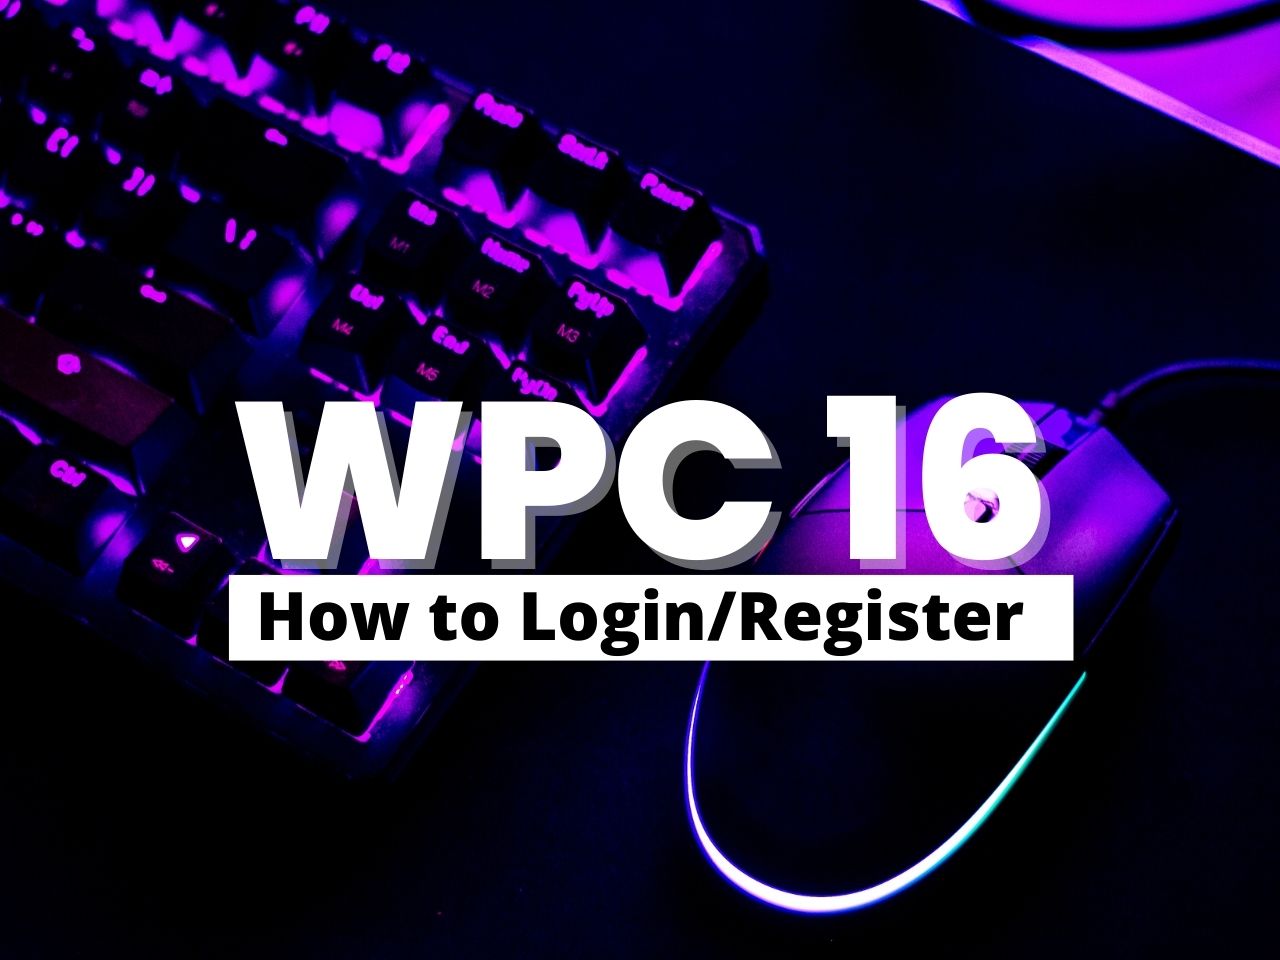 The best Guide to WPC16 Login